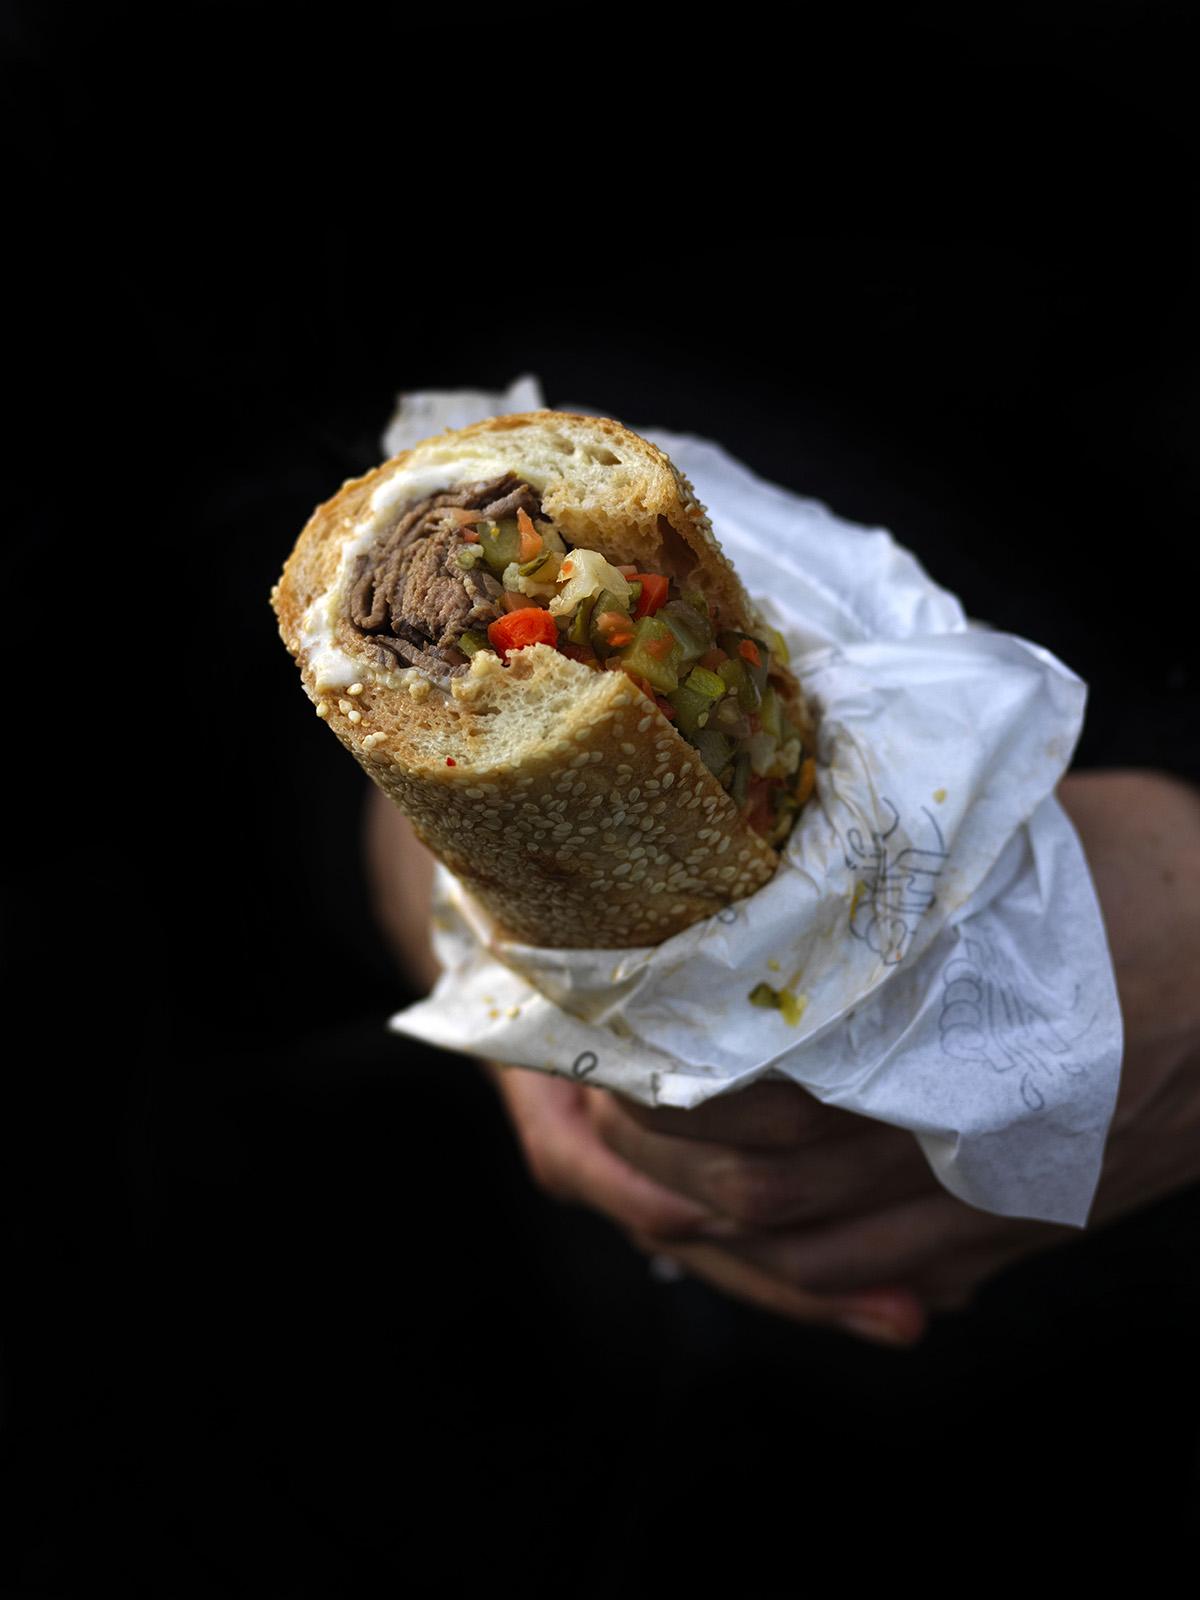 The Italian Beef - a champion of Chicago culinary culture